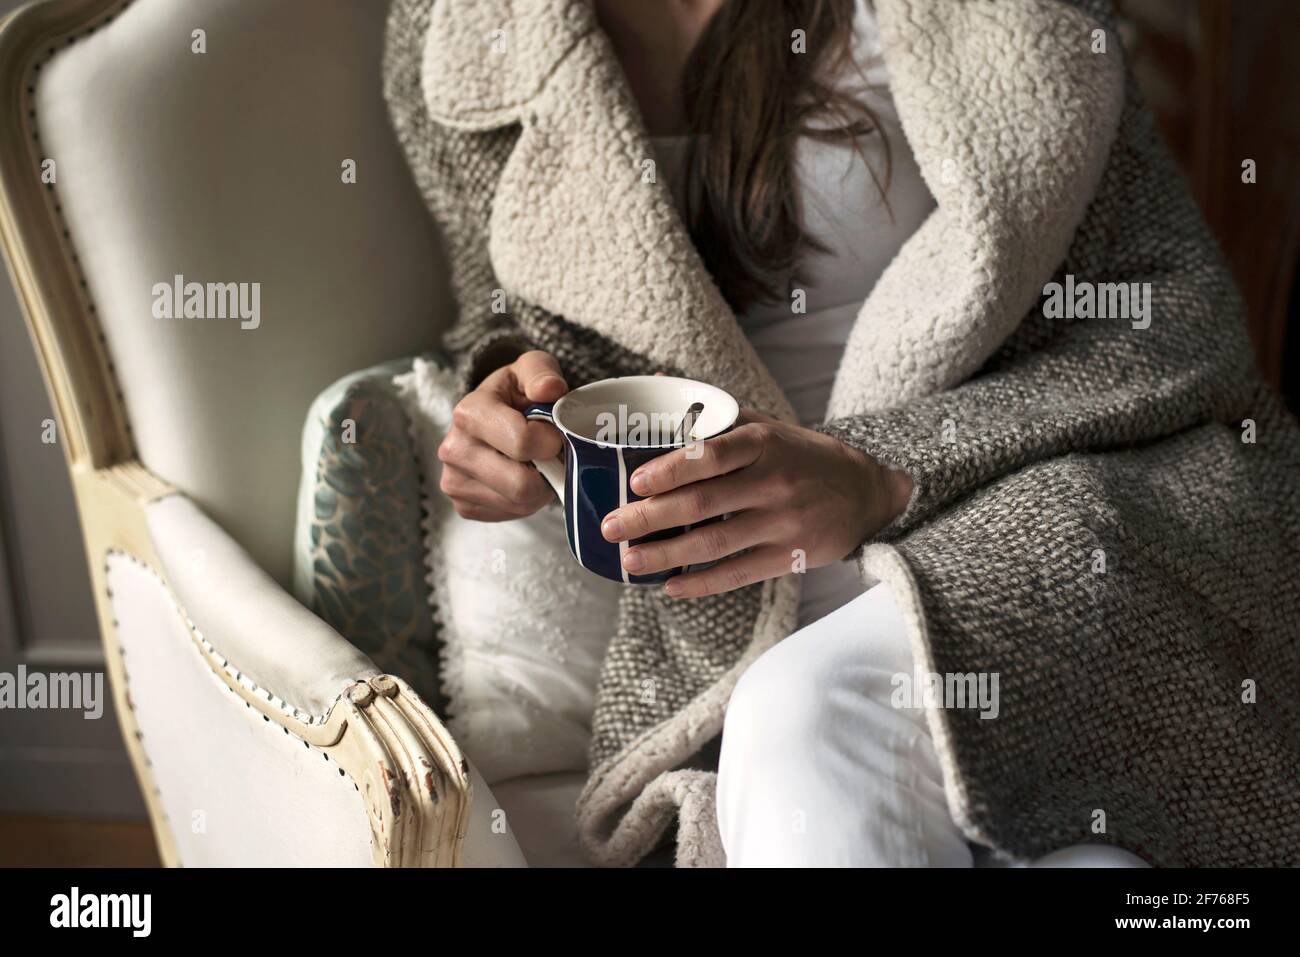 Close up of female in cosy warm coat sitting on vintage armchair holding a cup of coffee. Indoor lifestyle with relaxed country vibes. London, UK Stock Photo